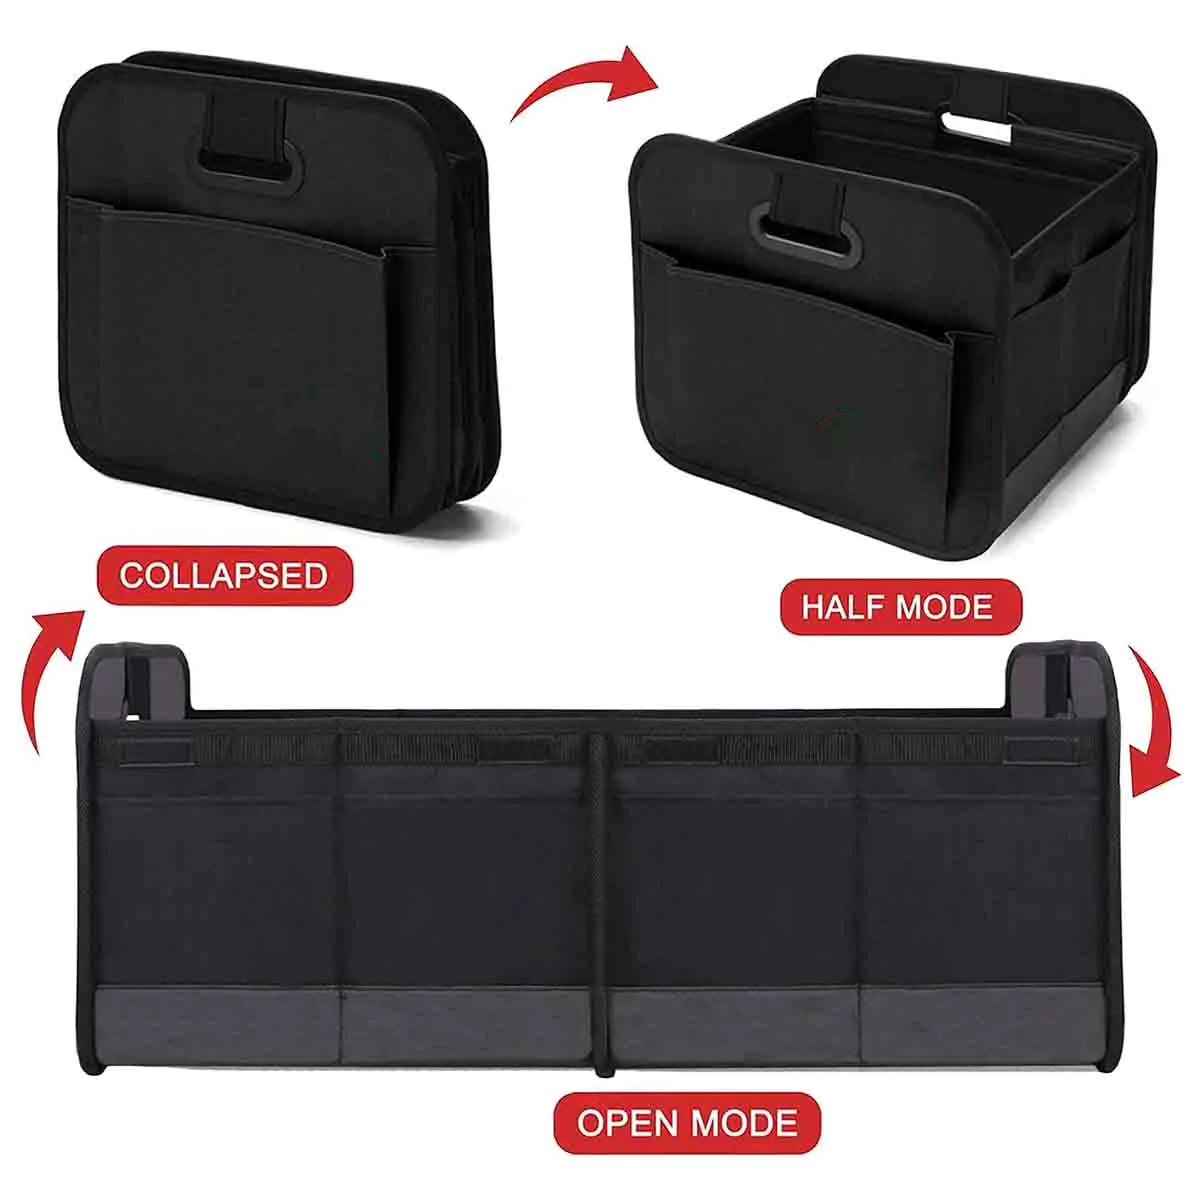 Custom Text For Car Trunk Organizer Storage, Compatible with All Cars, Reinforced Handles, Collapsible Multi, Compartment Car Organizers, Foldable and Waterproof, 600D Oxford Polyester DE12995